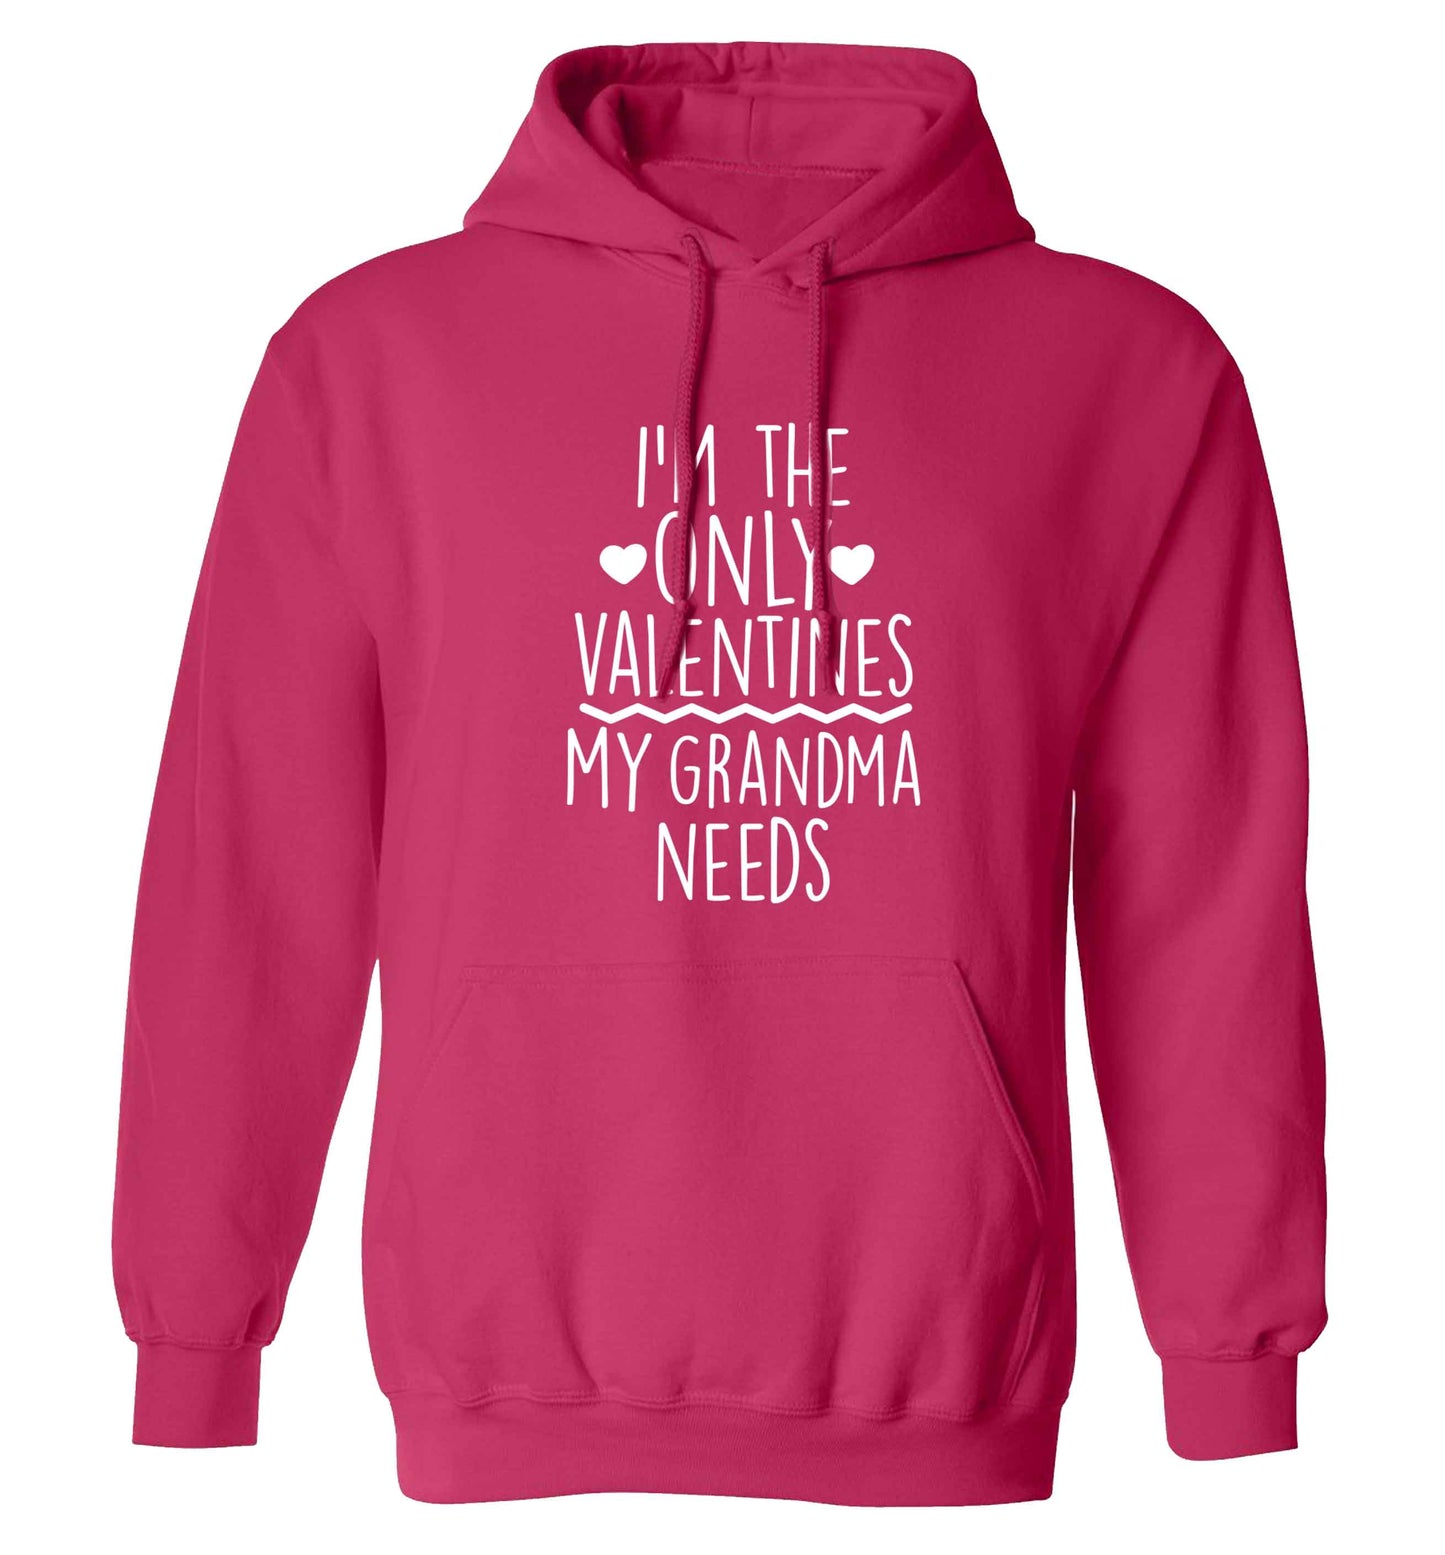 I'm the only valentines my grandma needs adults unisex pink hoodie 2XL